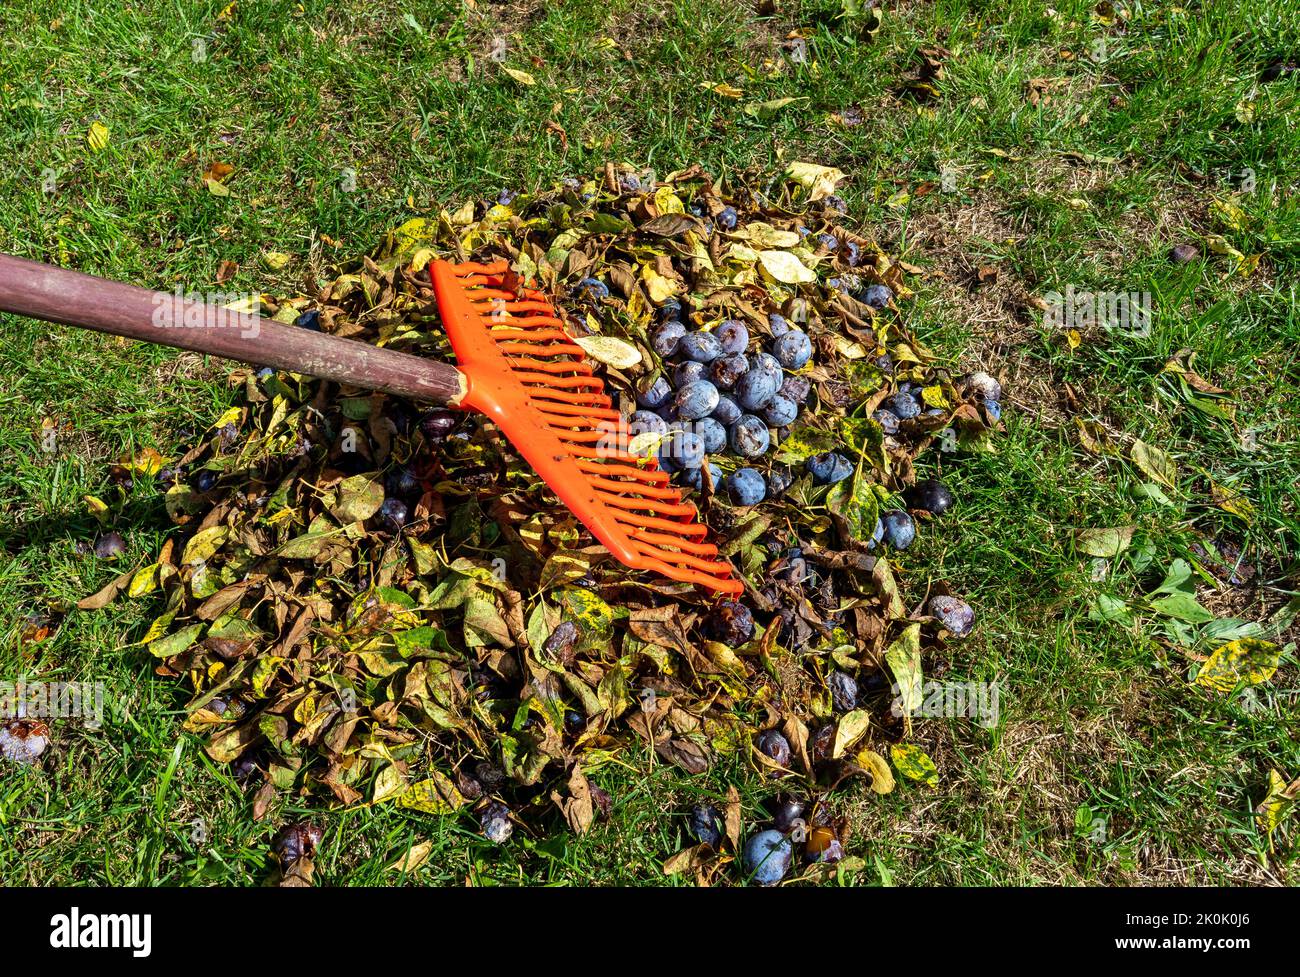 make rotten plums together with a rake Stock Photo